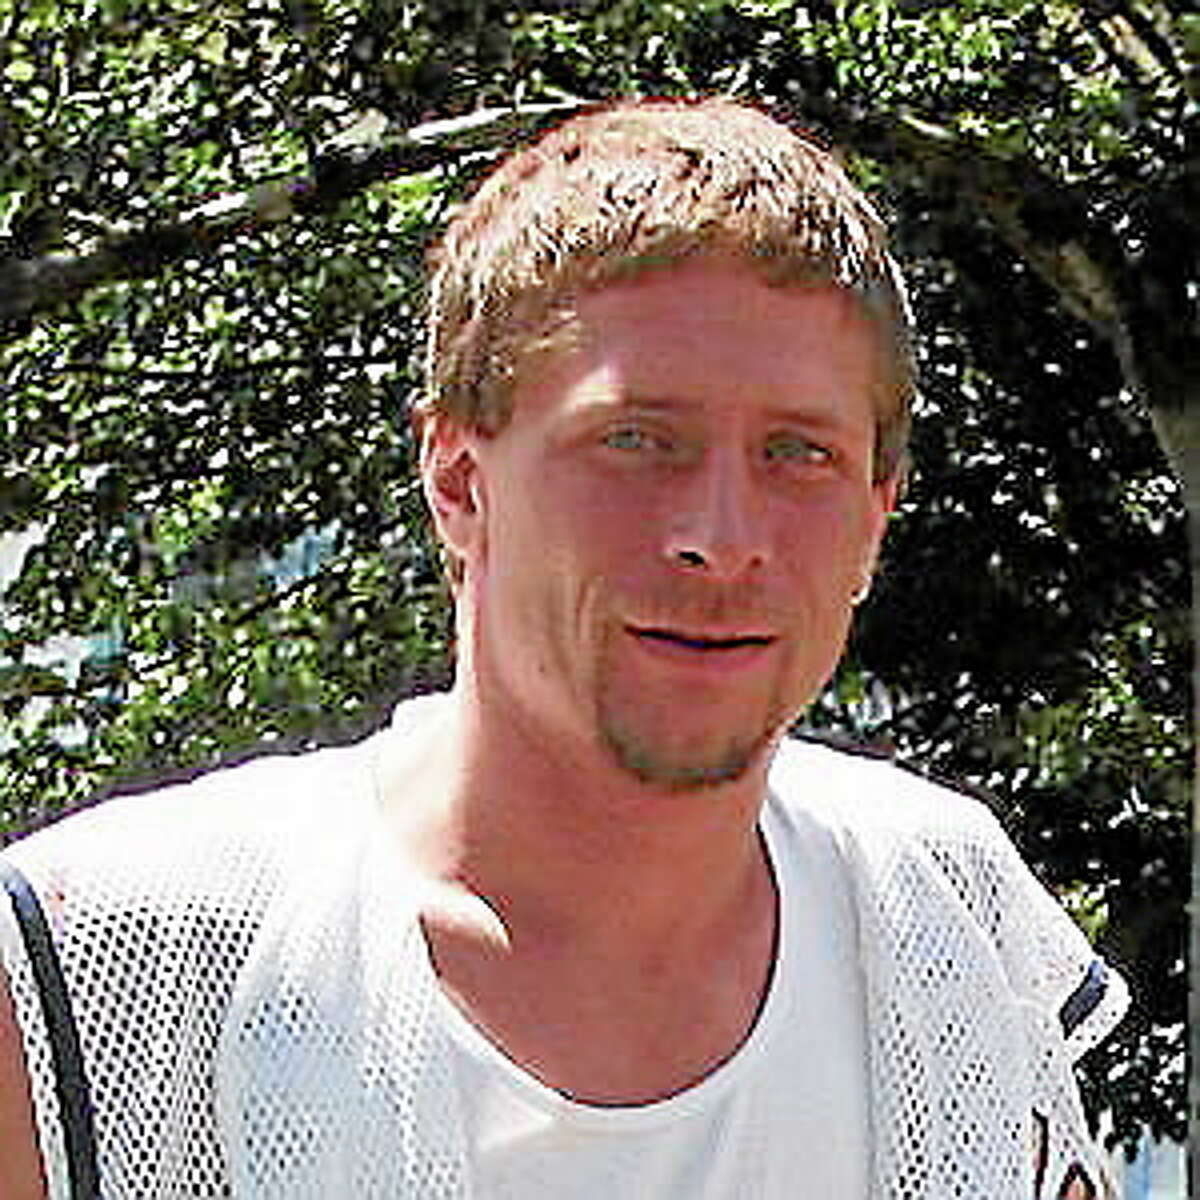 Edward Andrew Thompson was killed in New Haven in 2011